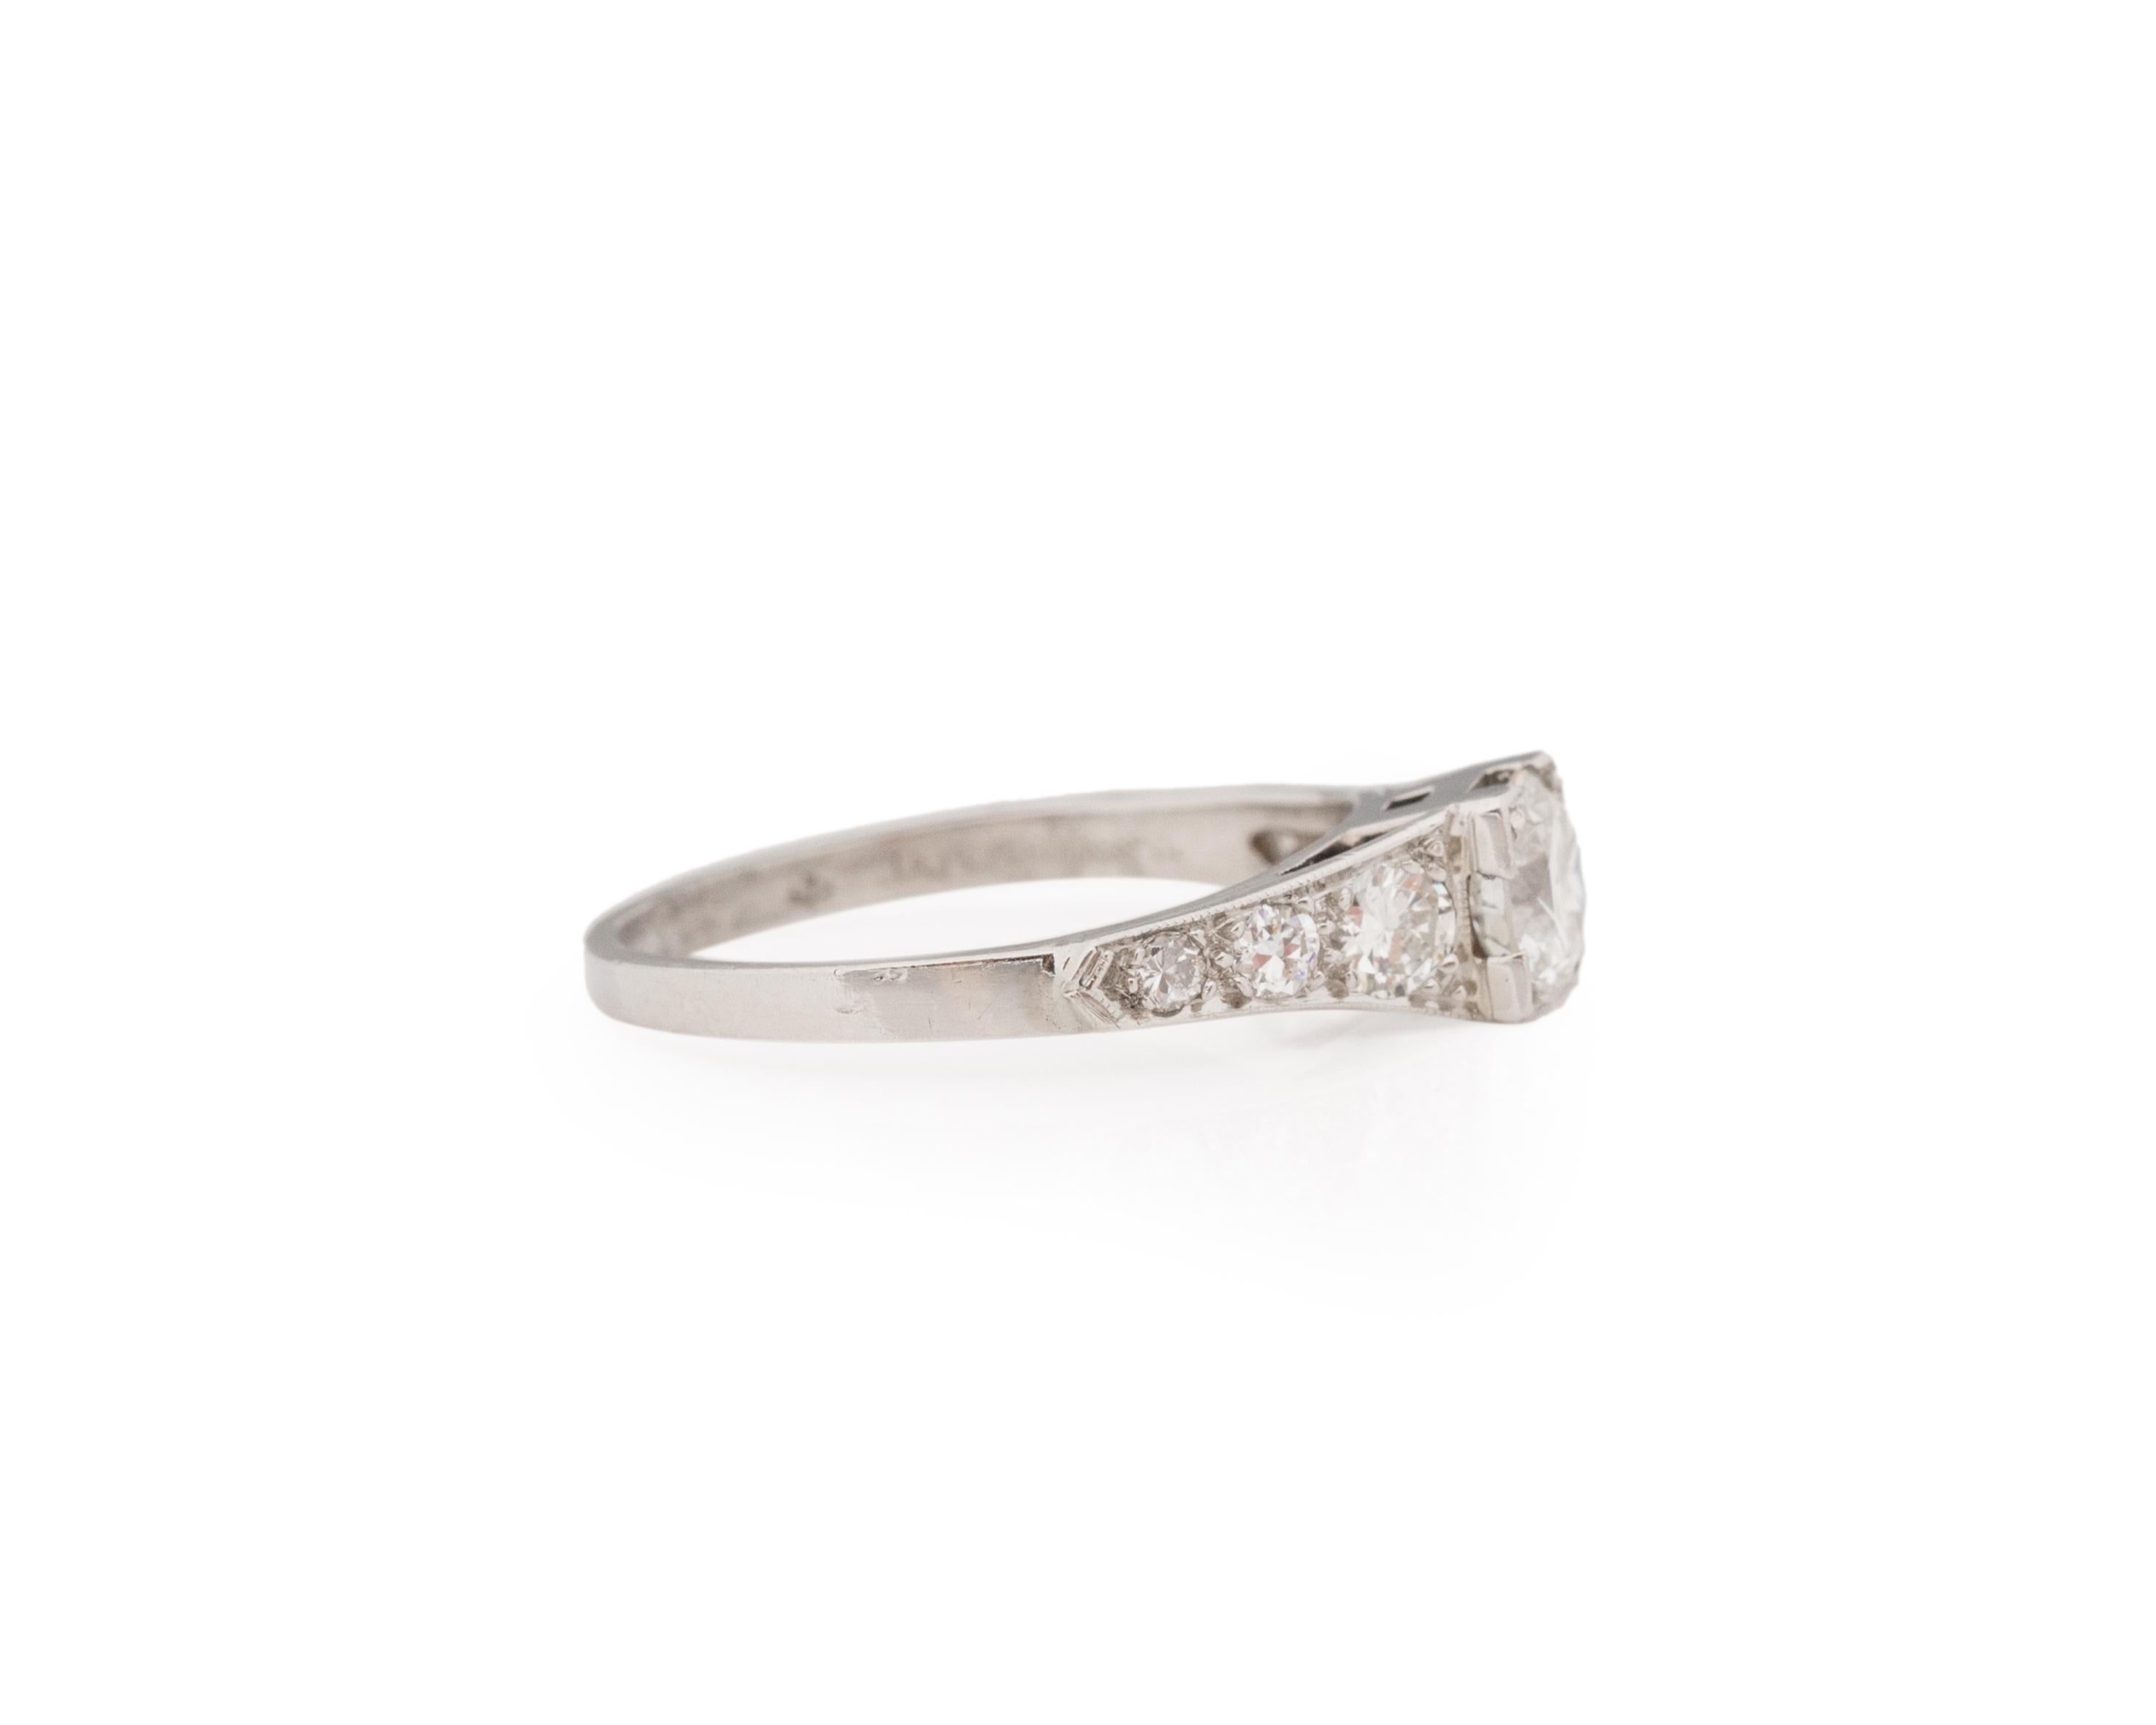 Ring Size: 5.5
Metal Type: Platinum [Hallmarked, and Tested]
Weight: 3.0 grams

Center Diamond Details:
Weight: .55ct
Cut: Old European brilliant
Color: F
Clarity: VS

Finger to Top of Stone Measurement: 5mm
Condition: Excellent